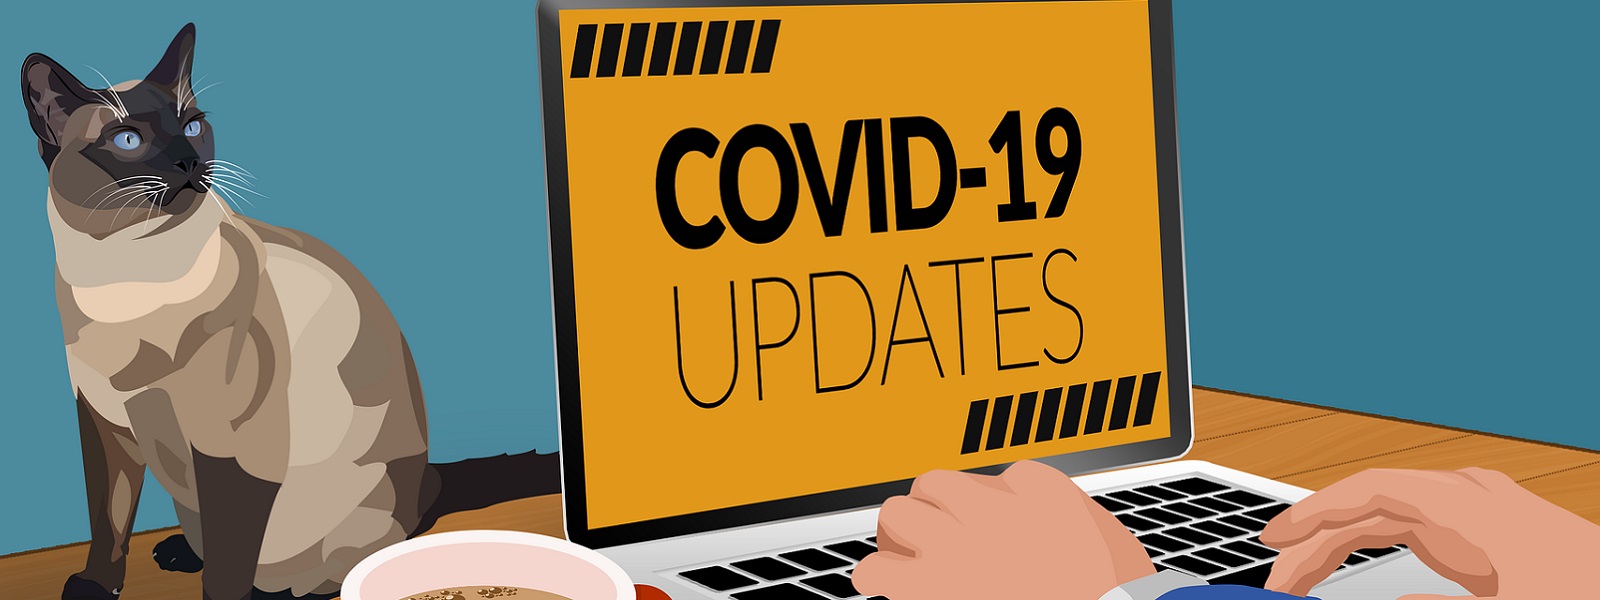 A laptop displaying COVID-19 updates